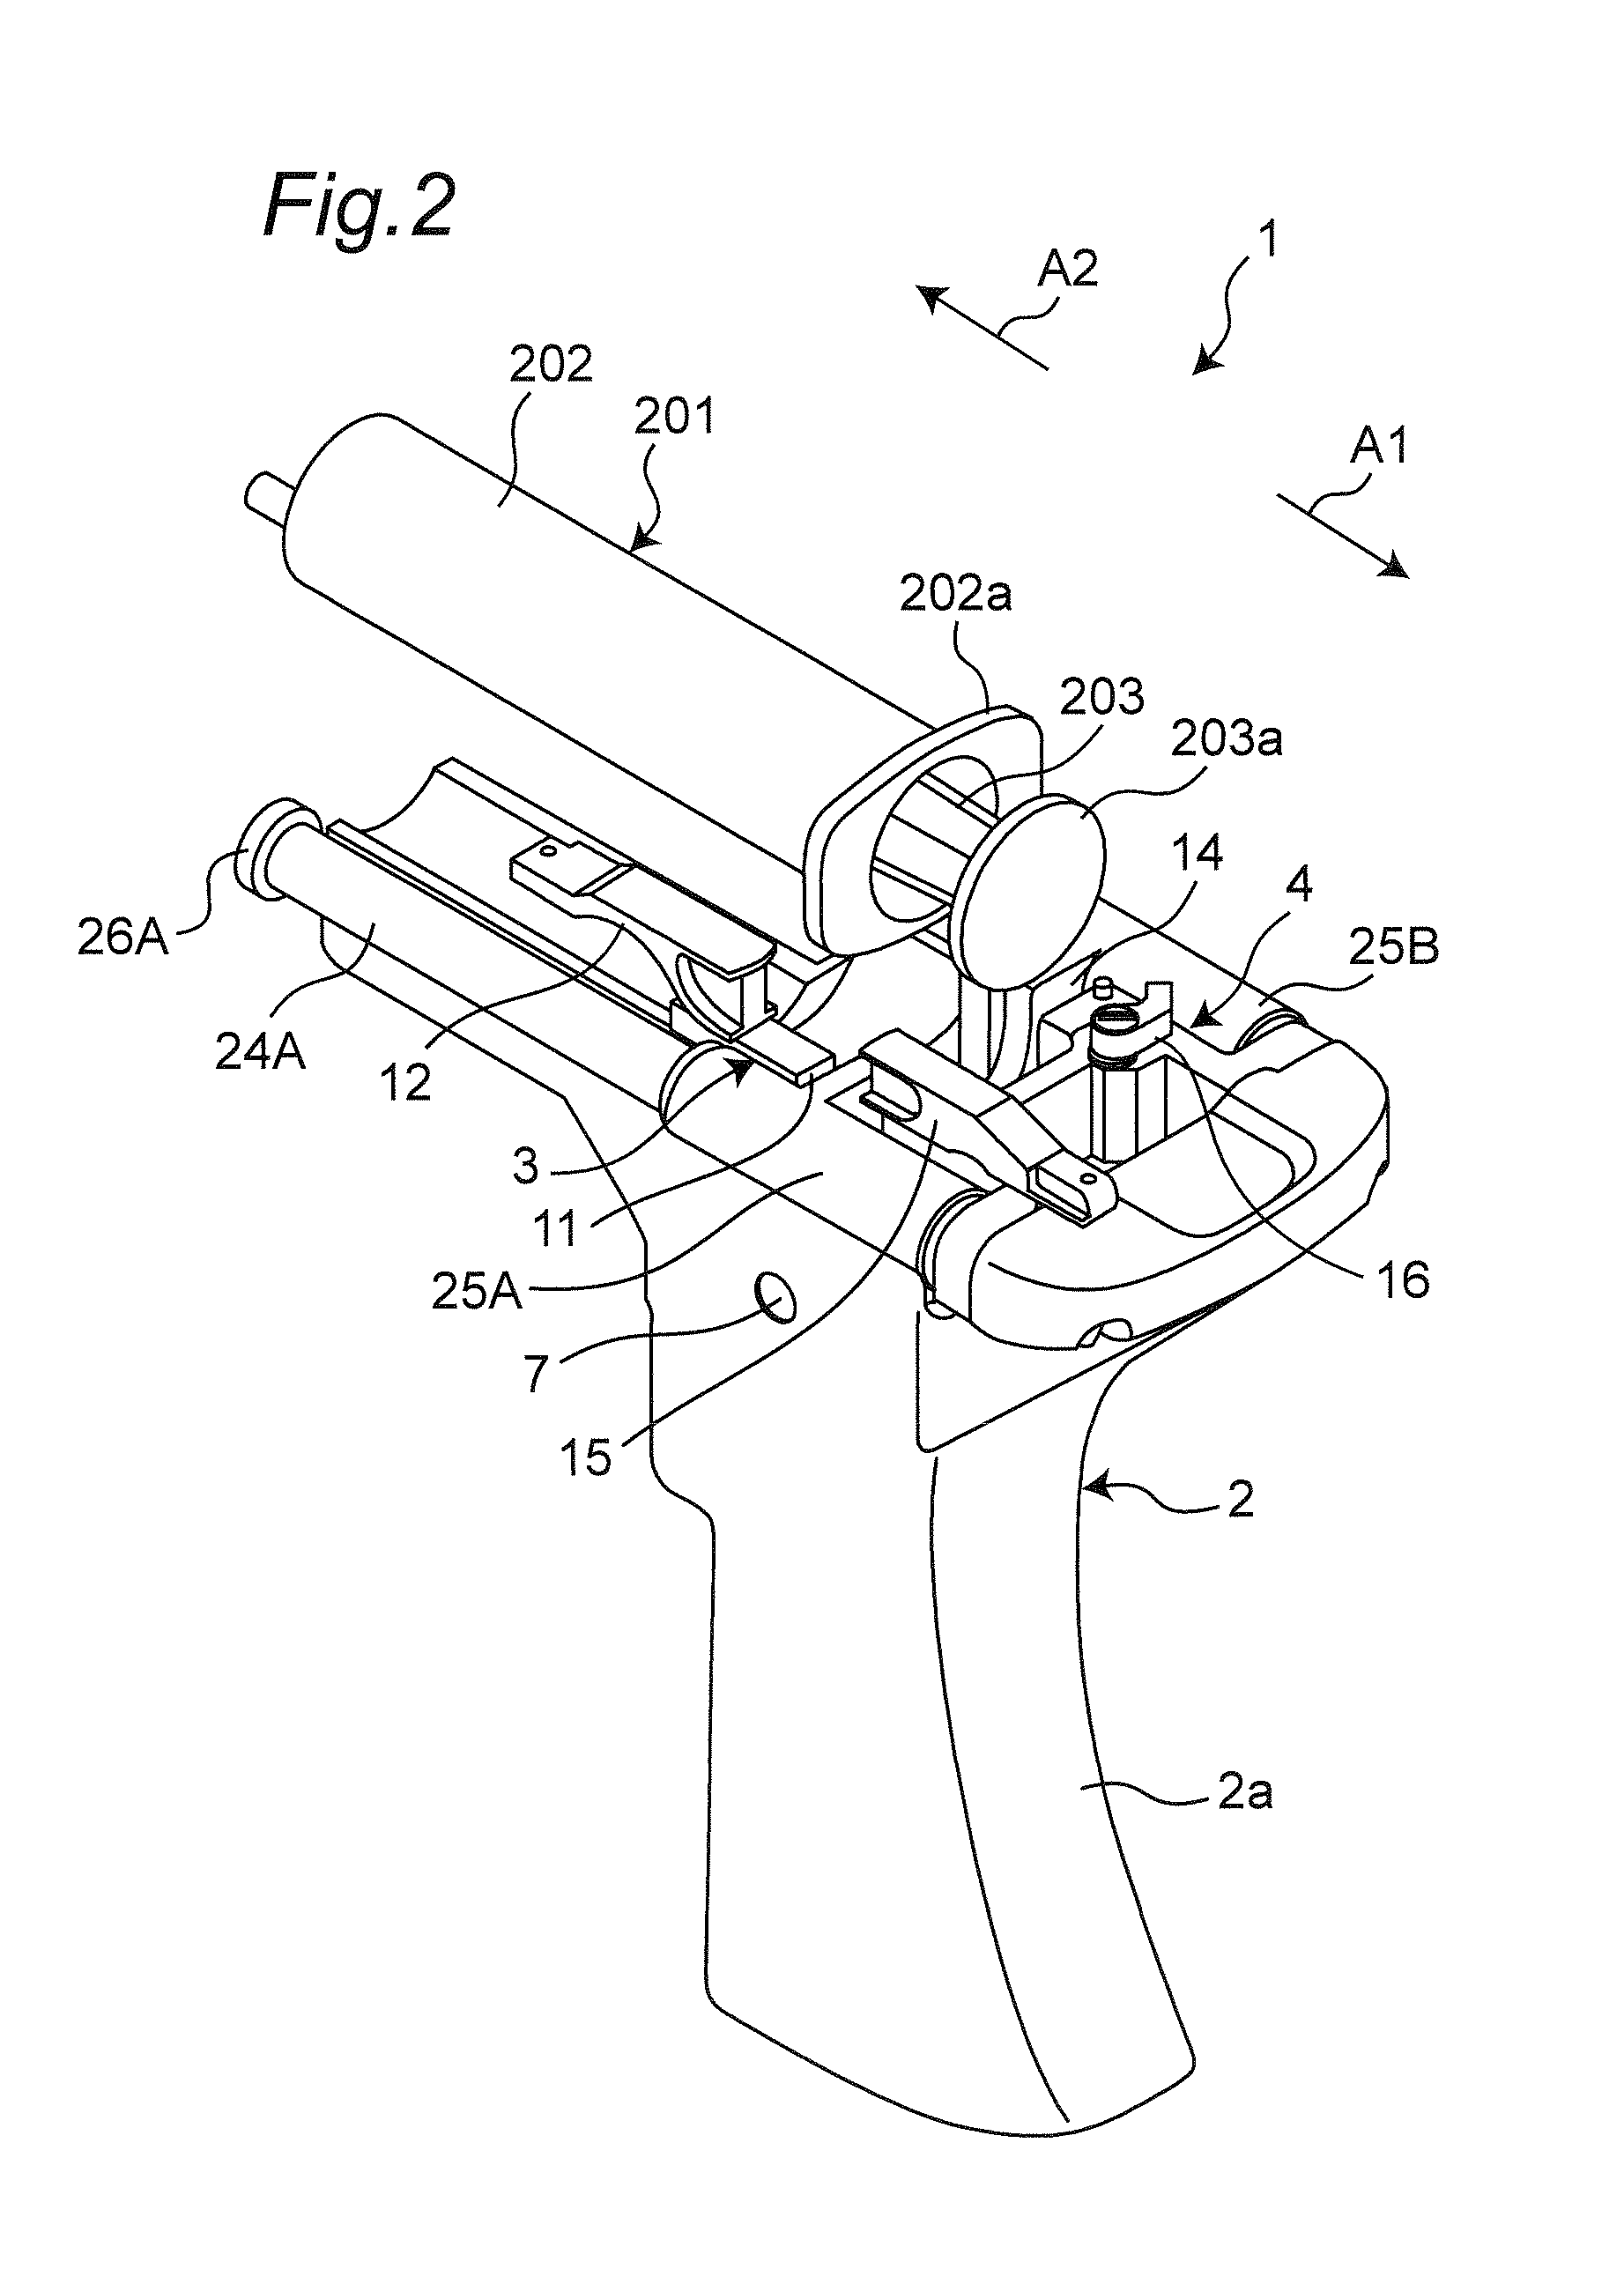 Syringe drive device and medication dispensing apparatus